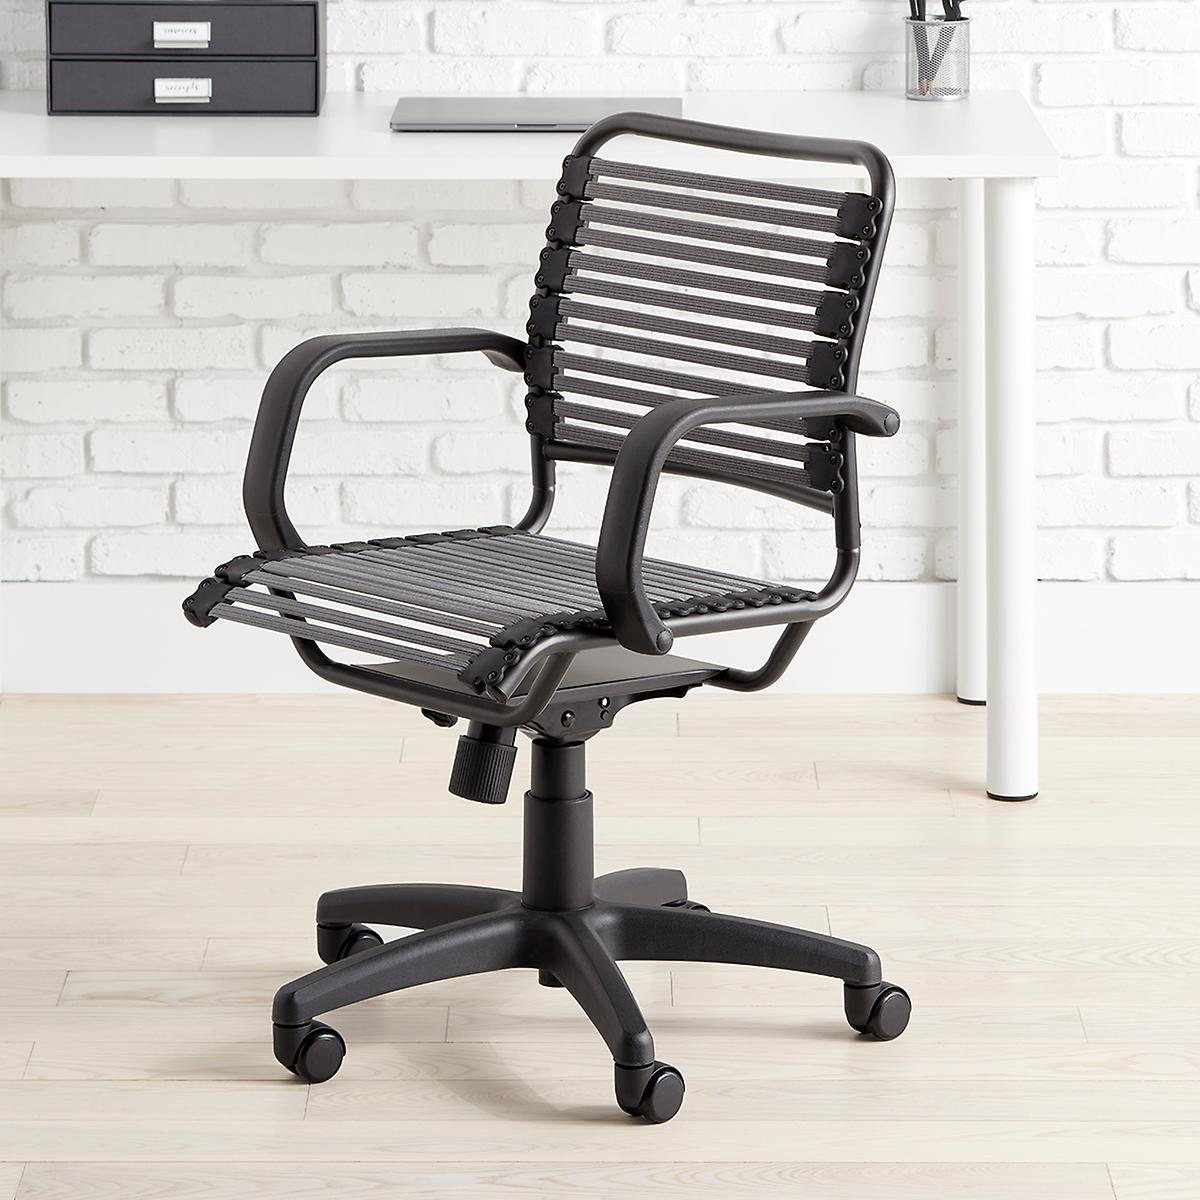 10078184 Flat Bungee Office Chair Wi ?width=1200&height=1200&align=center